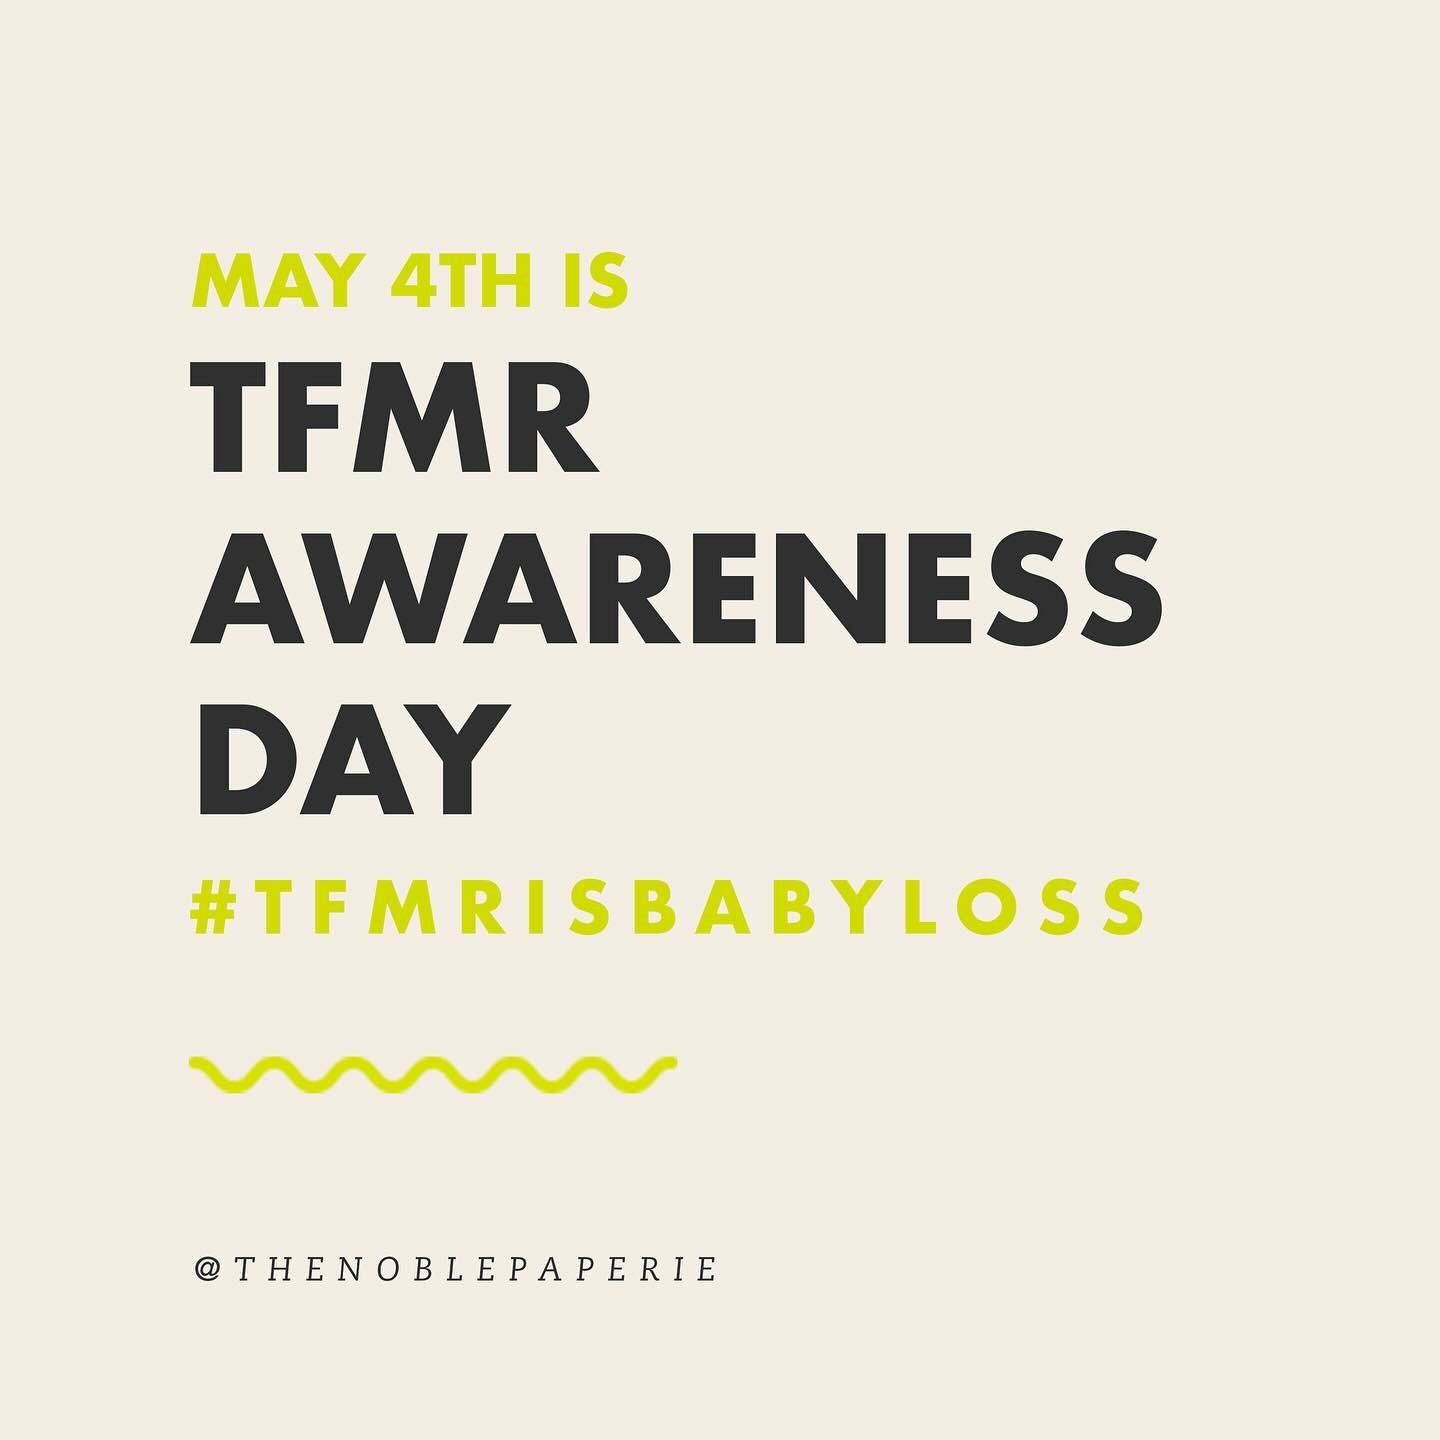 Today is #TFMRAwarenessDay. 

A TFMR is a termination for medical reasons, and it IS BABY LOSS. Today, I want to sit alongside the TFMR community to raise awareness, and for the first time, share my own connection to TFMR.

For those who are not a pa